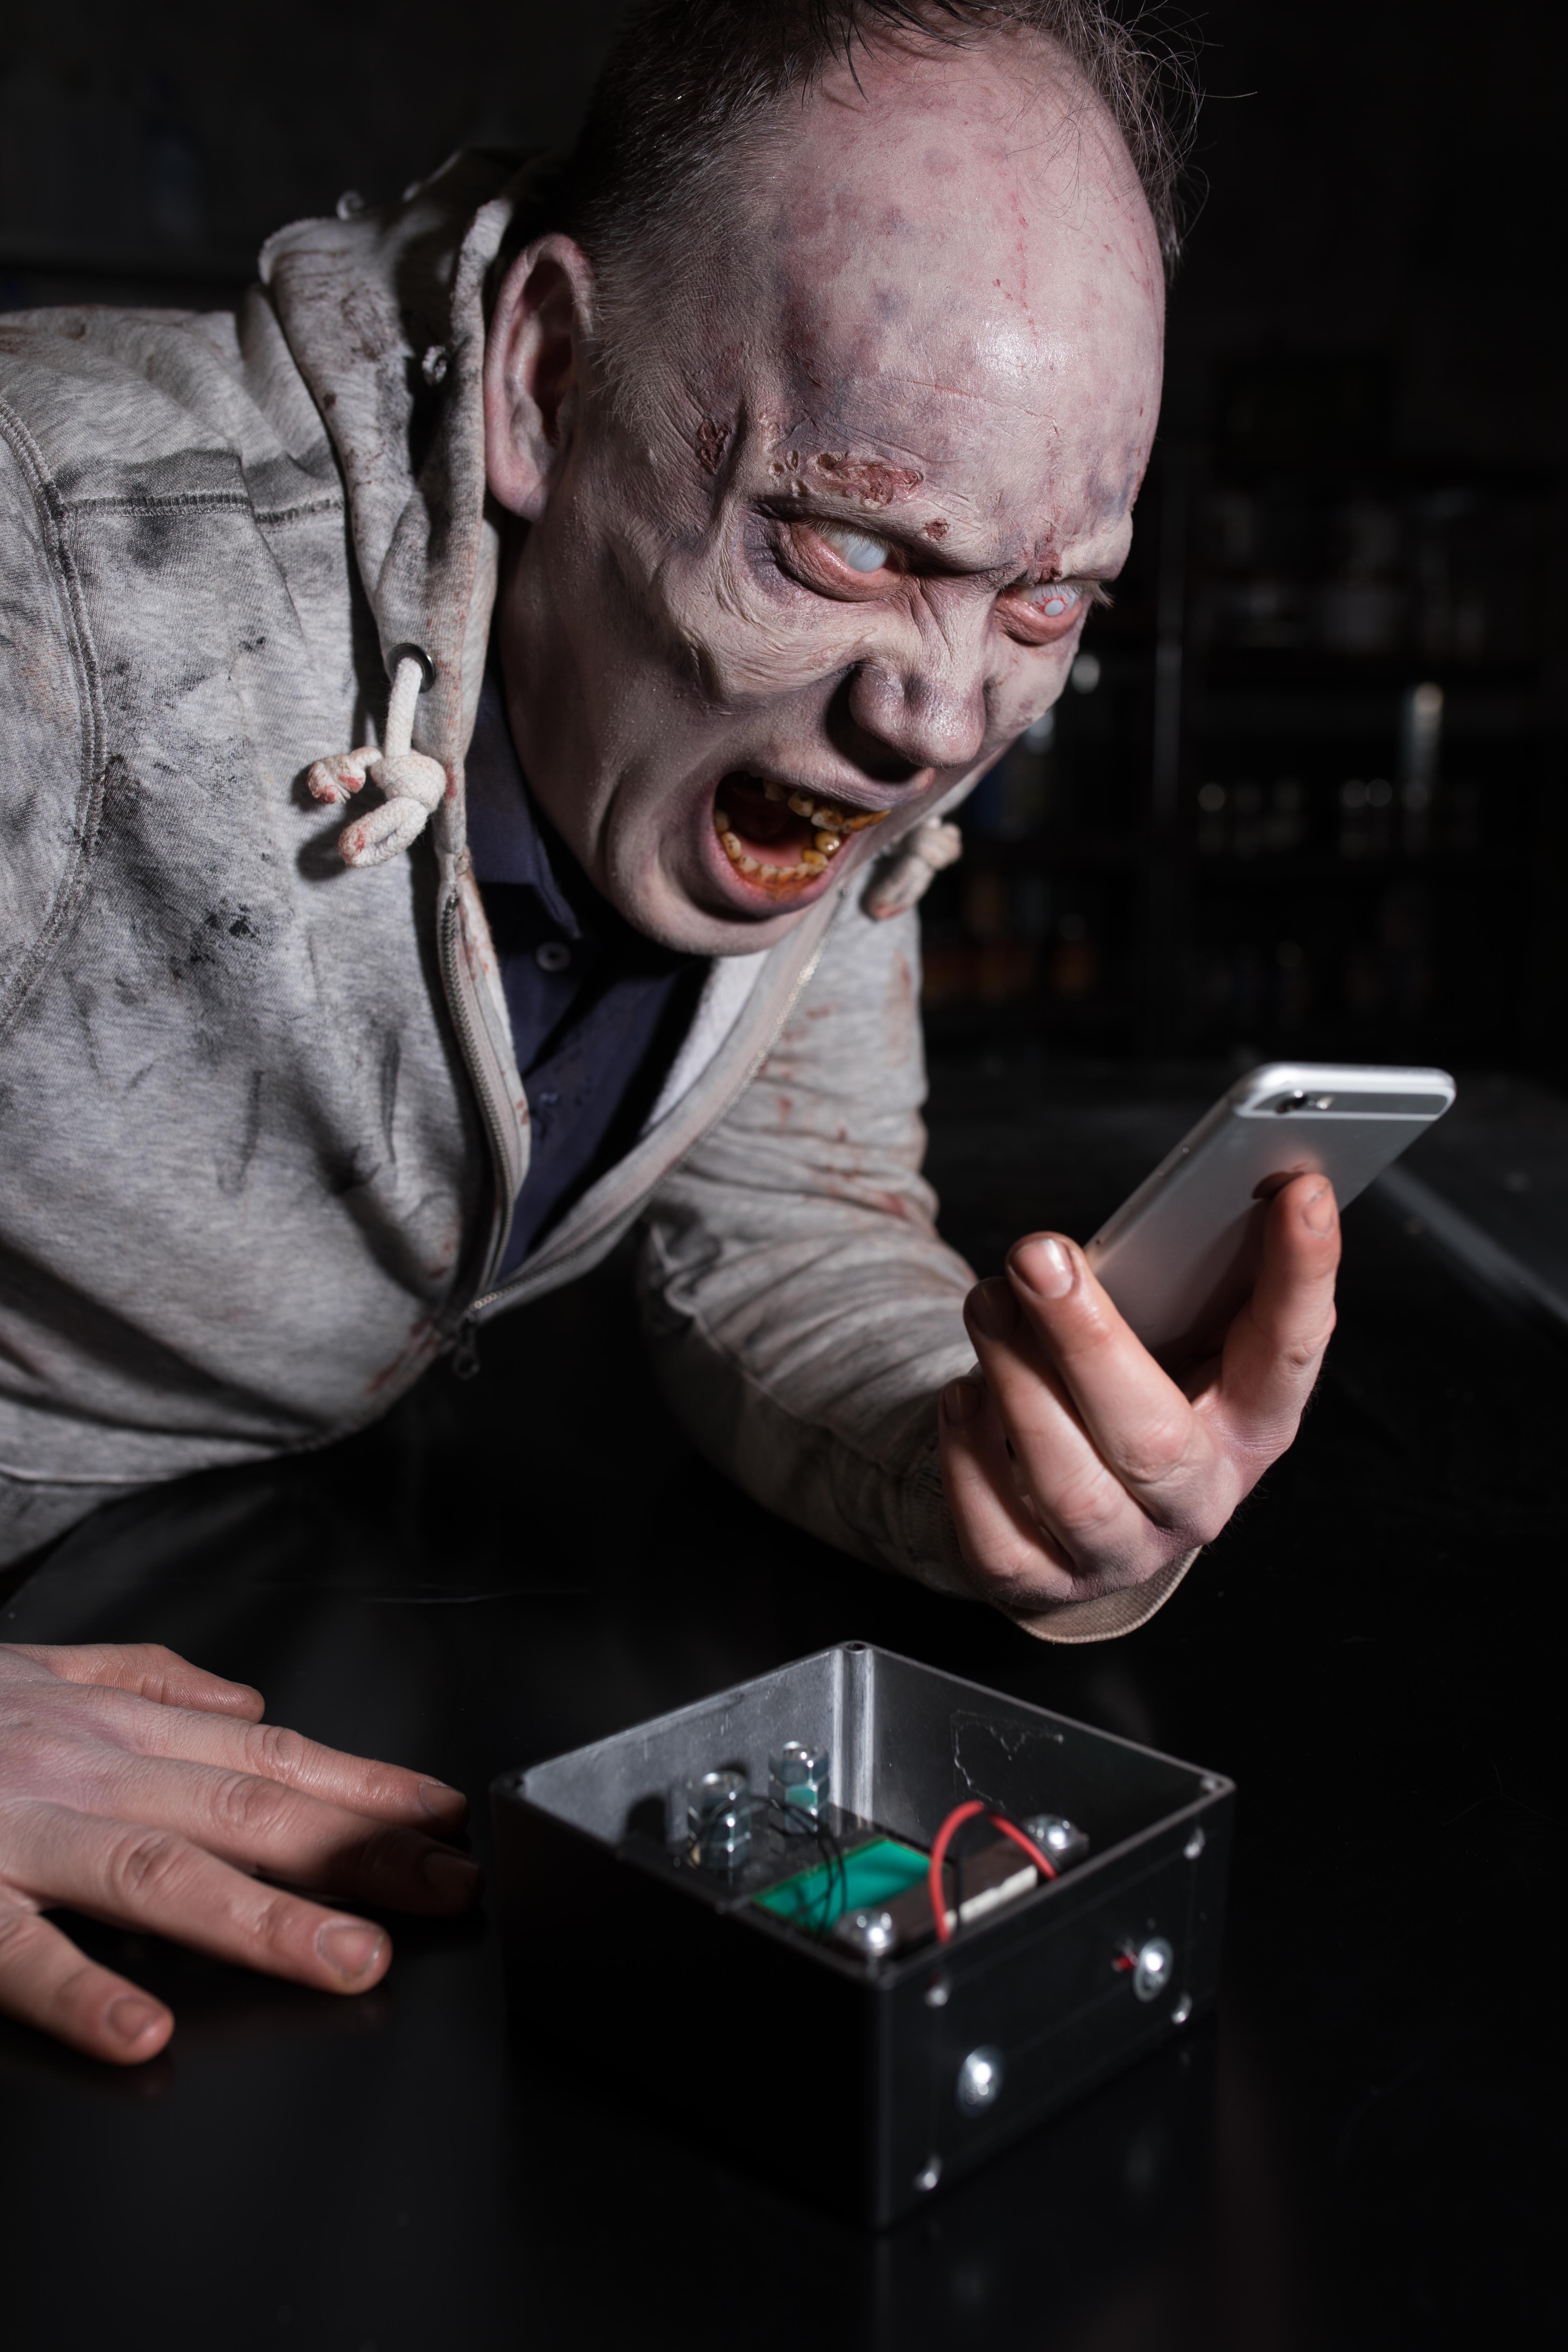 A zombie charging his phone using the energy harvesting technology. David Parry/PA Wire